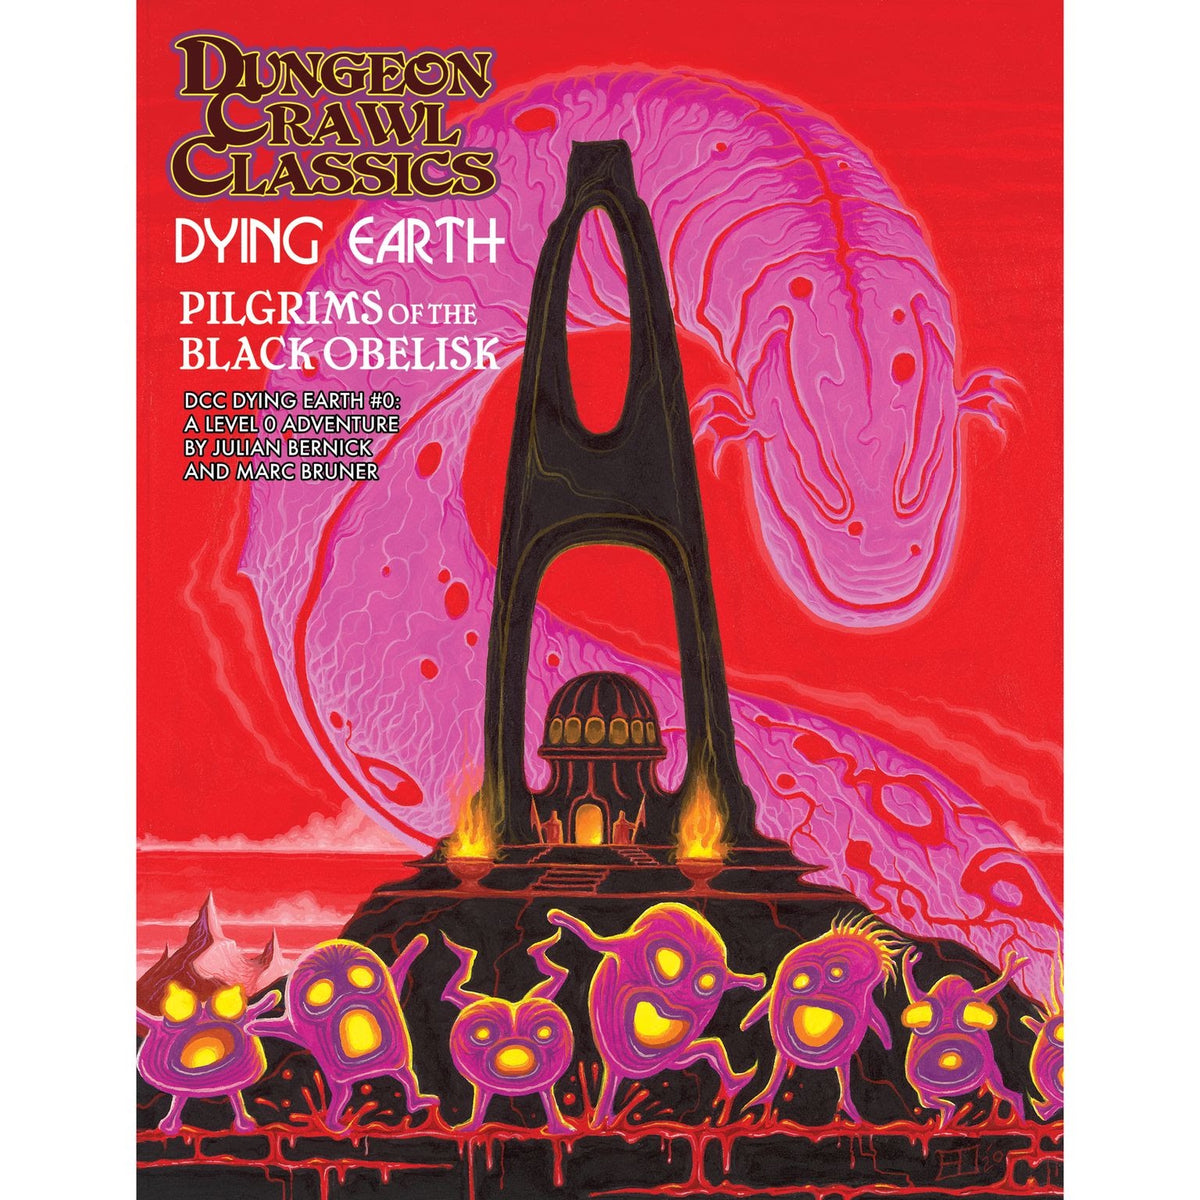 Dungeon Crawl Classics Dying Earth #0: The Black Obelisk